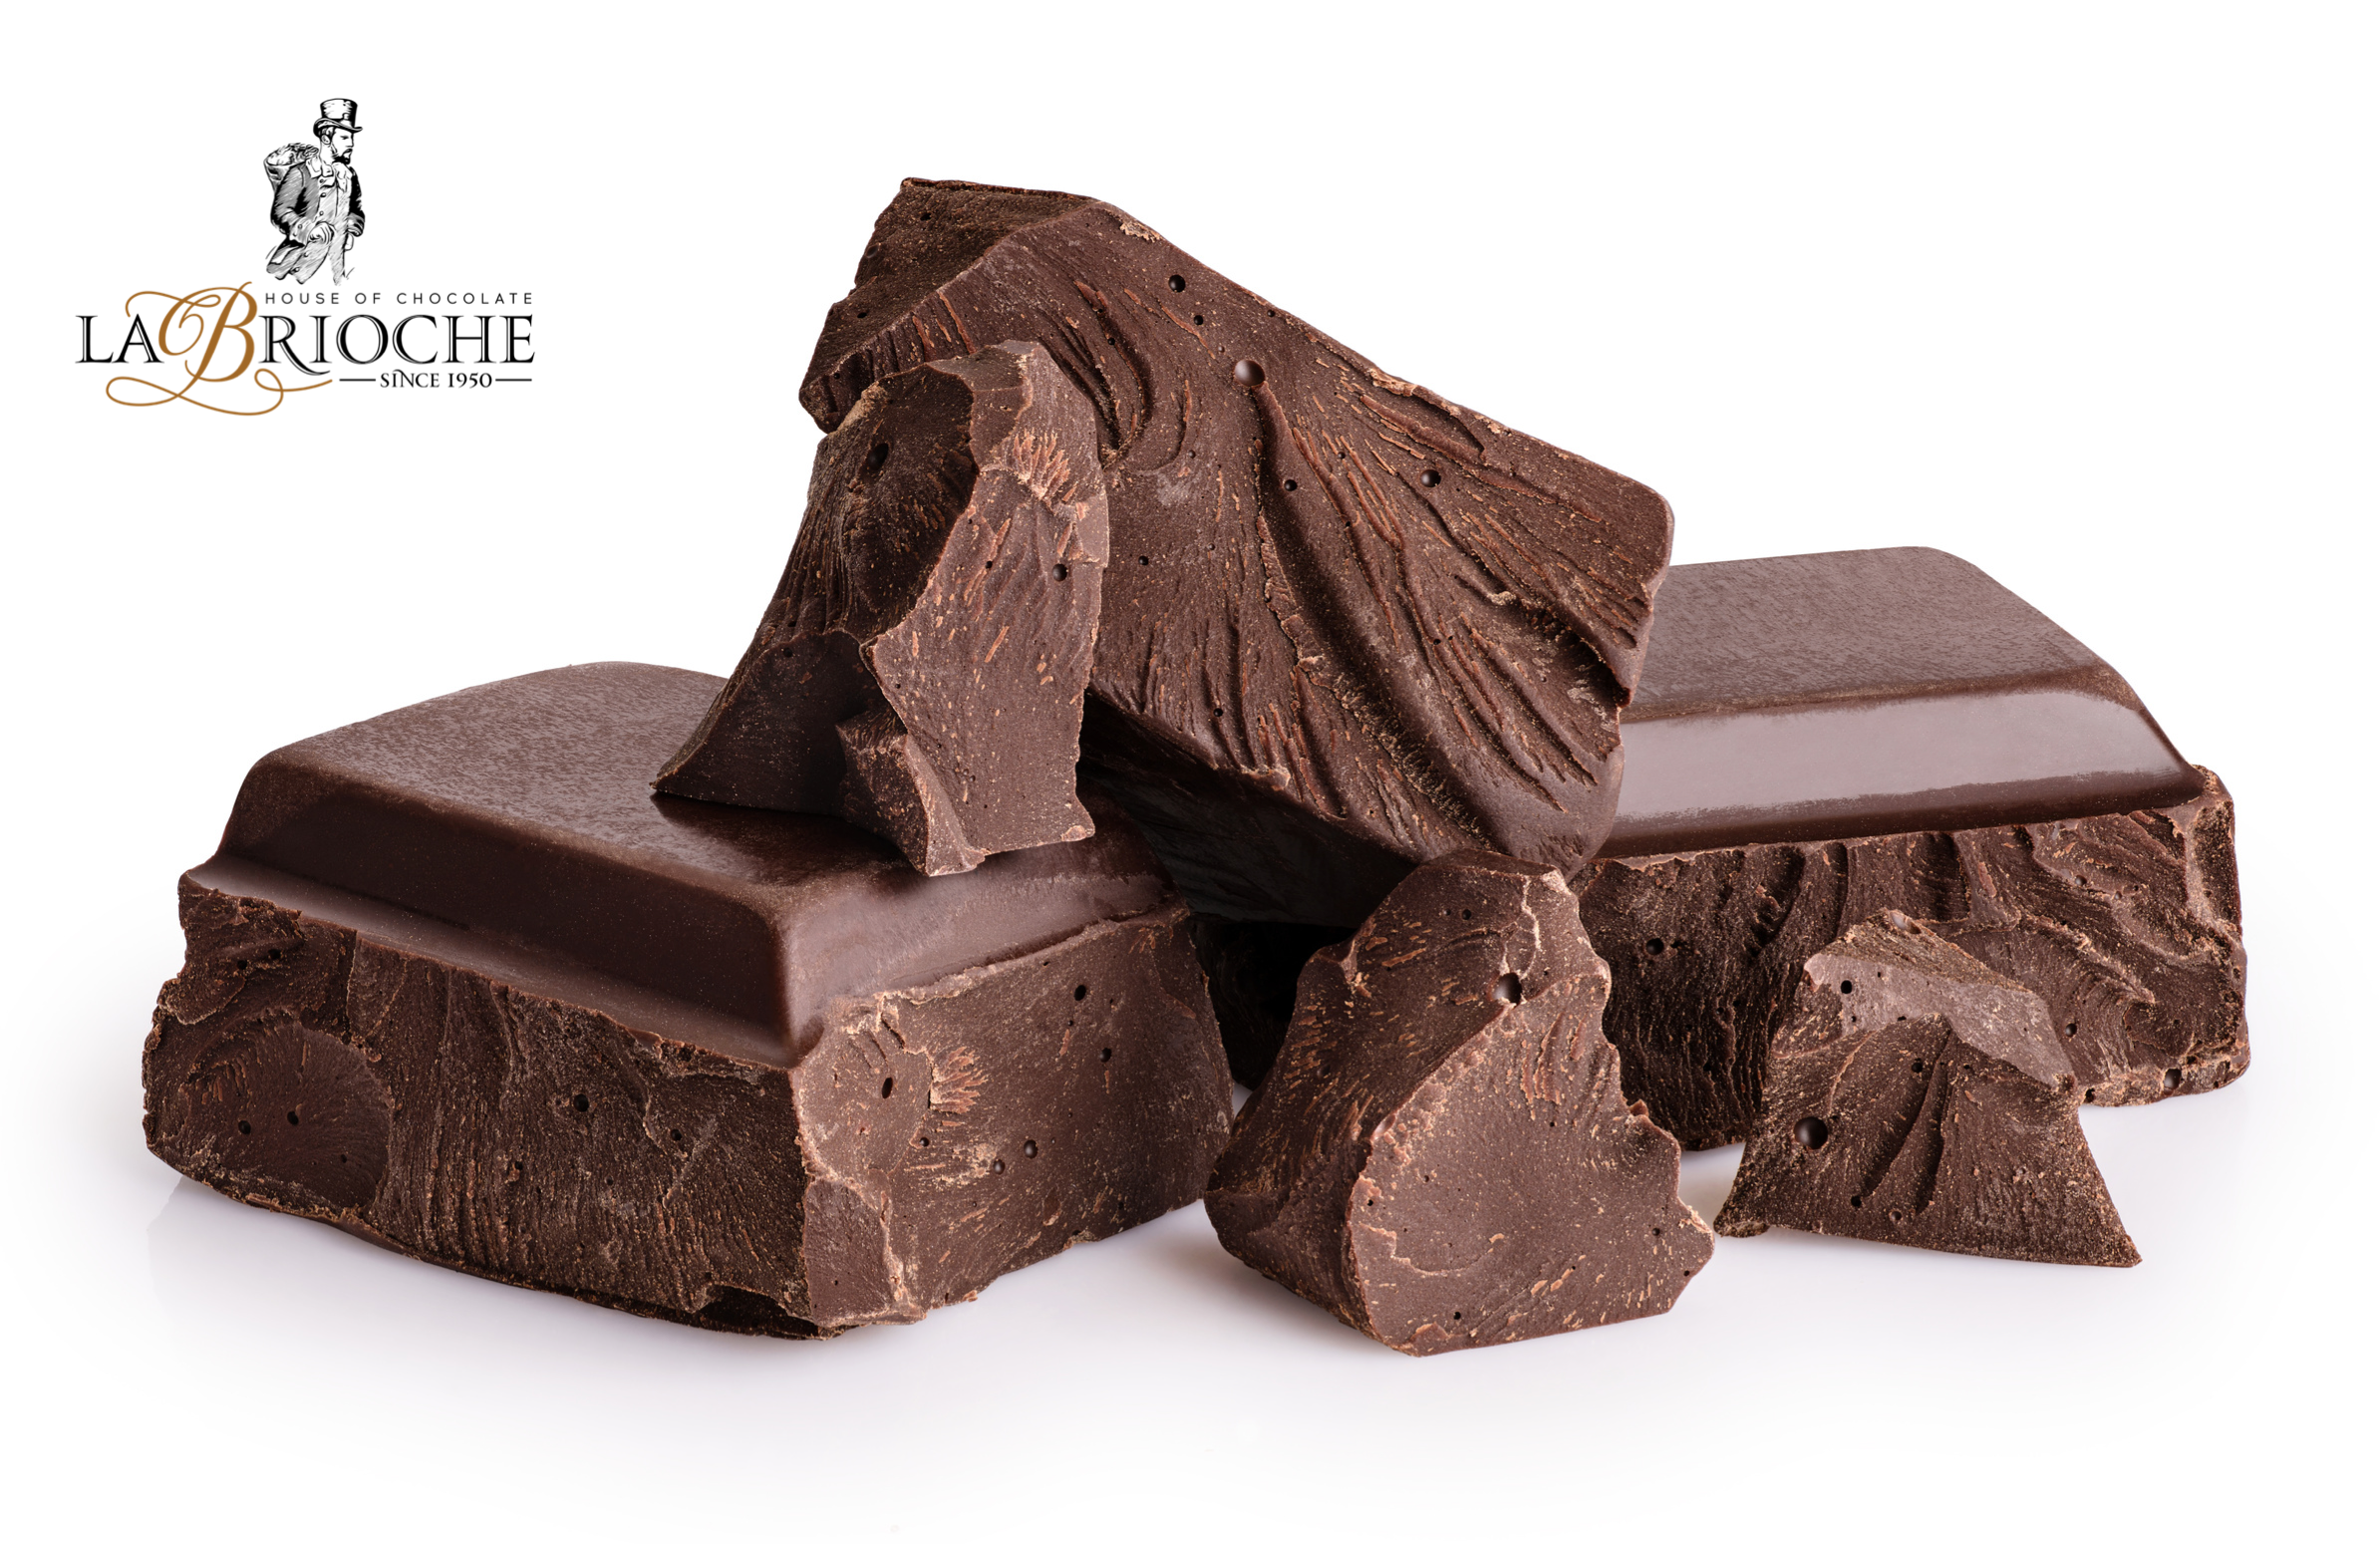 What Characterizes the Taste of Chocolate?